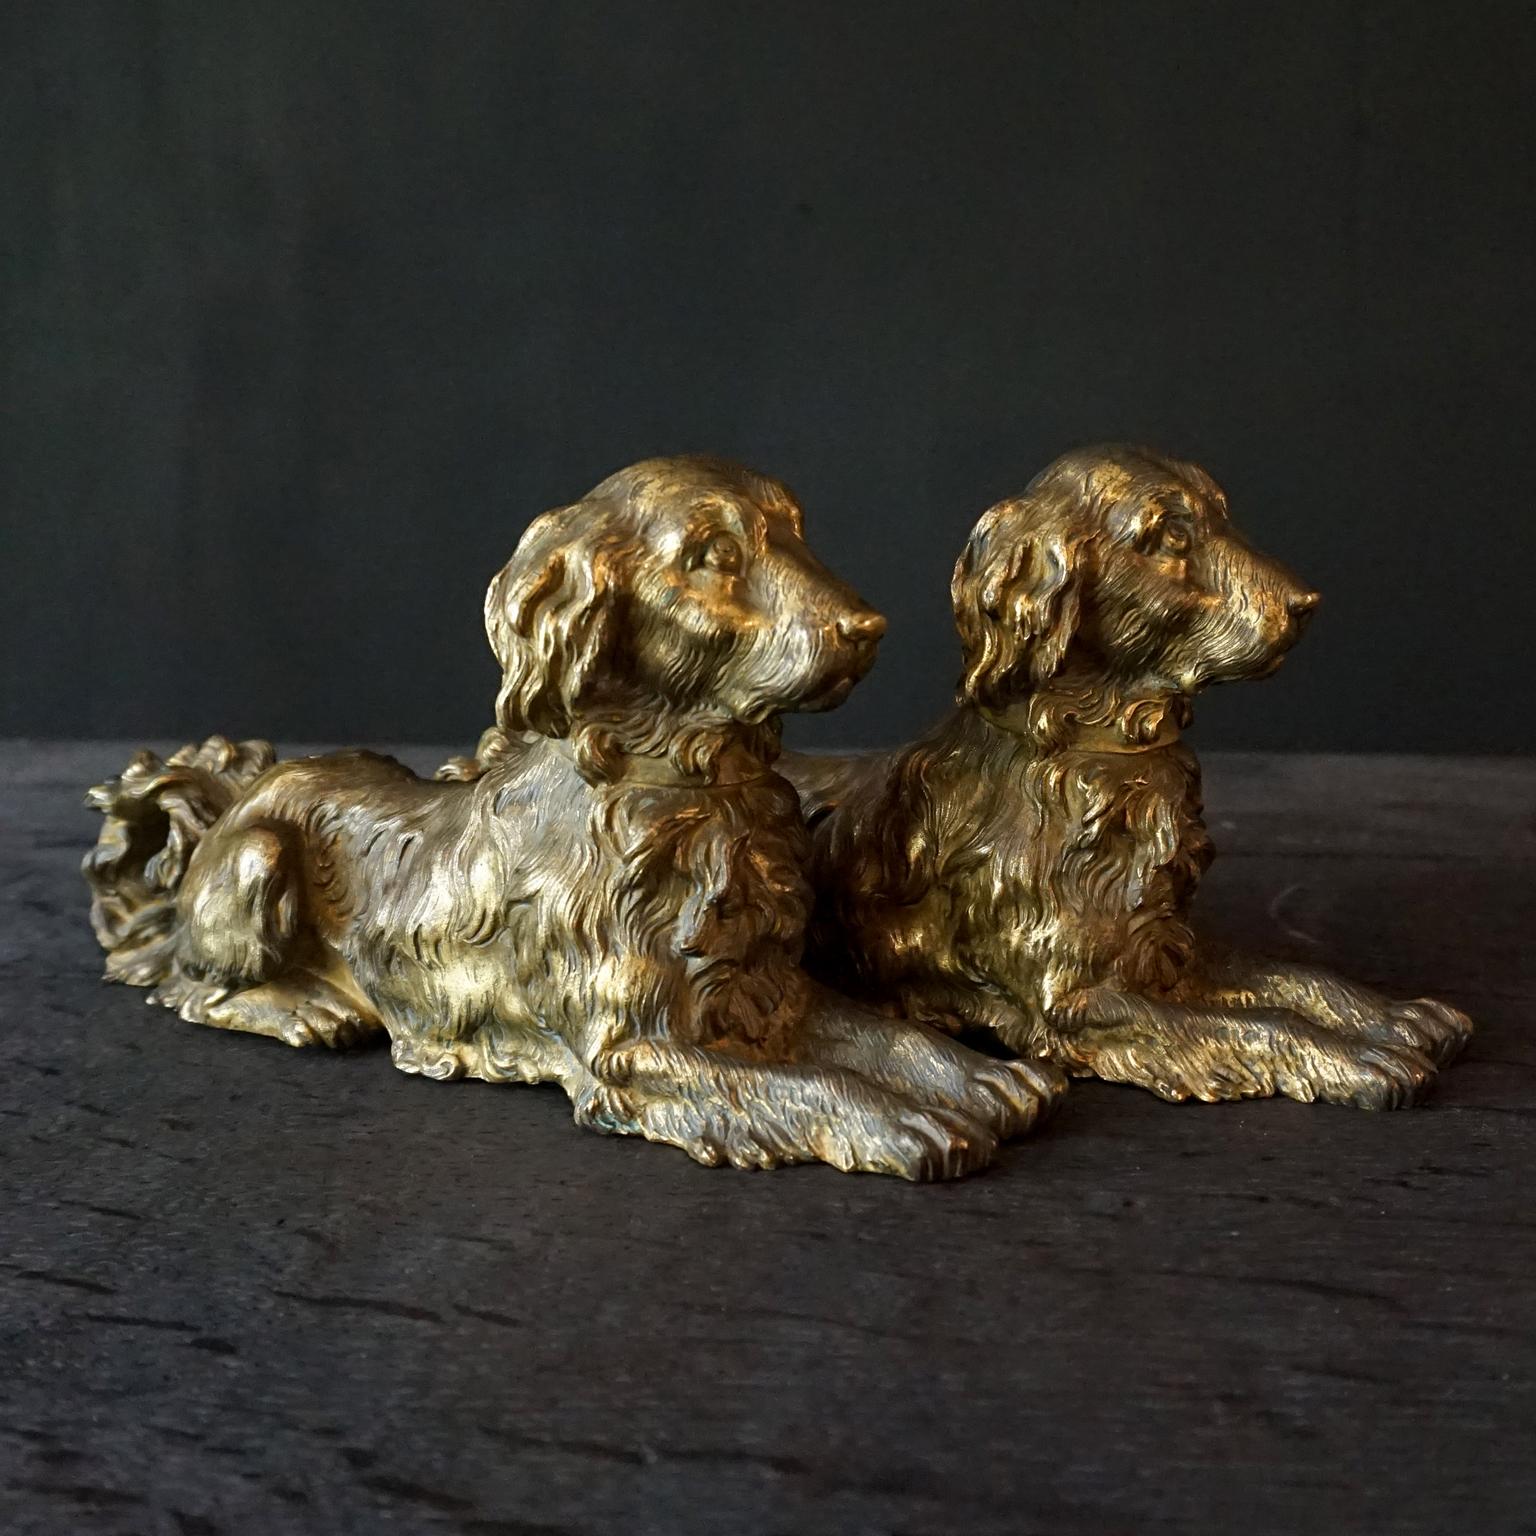 Very decorative couple of hunting dogs in lying position made out of very detailed solid cast brass. Because of the solidness they are quite heavy an easily could work as bookends or paperweights. I think Golden Retrievers are depicted here, but